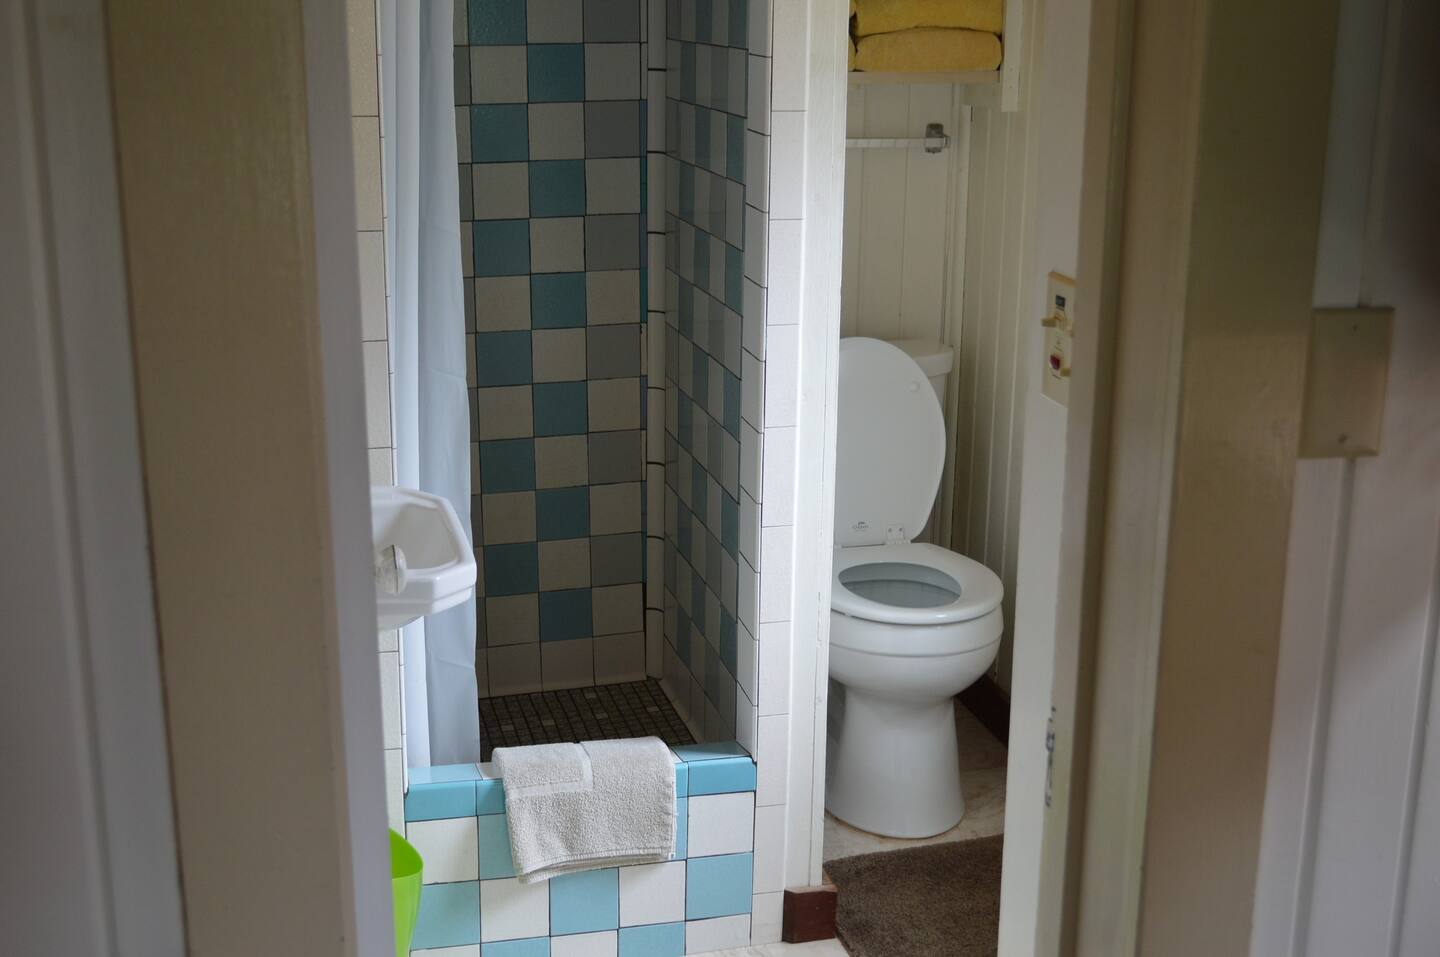 The tiny bathroom open off the living space and includes a small wash basin, toilet, and tiled shower.